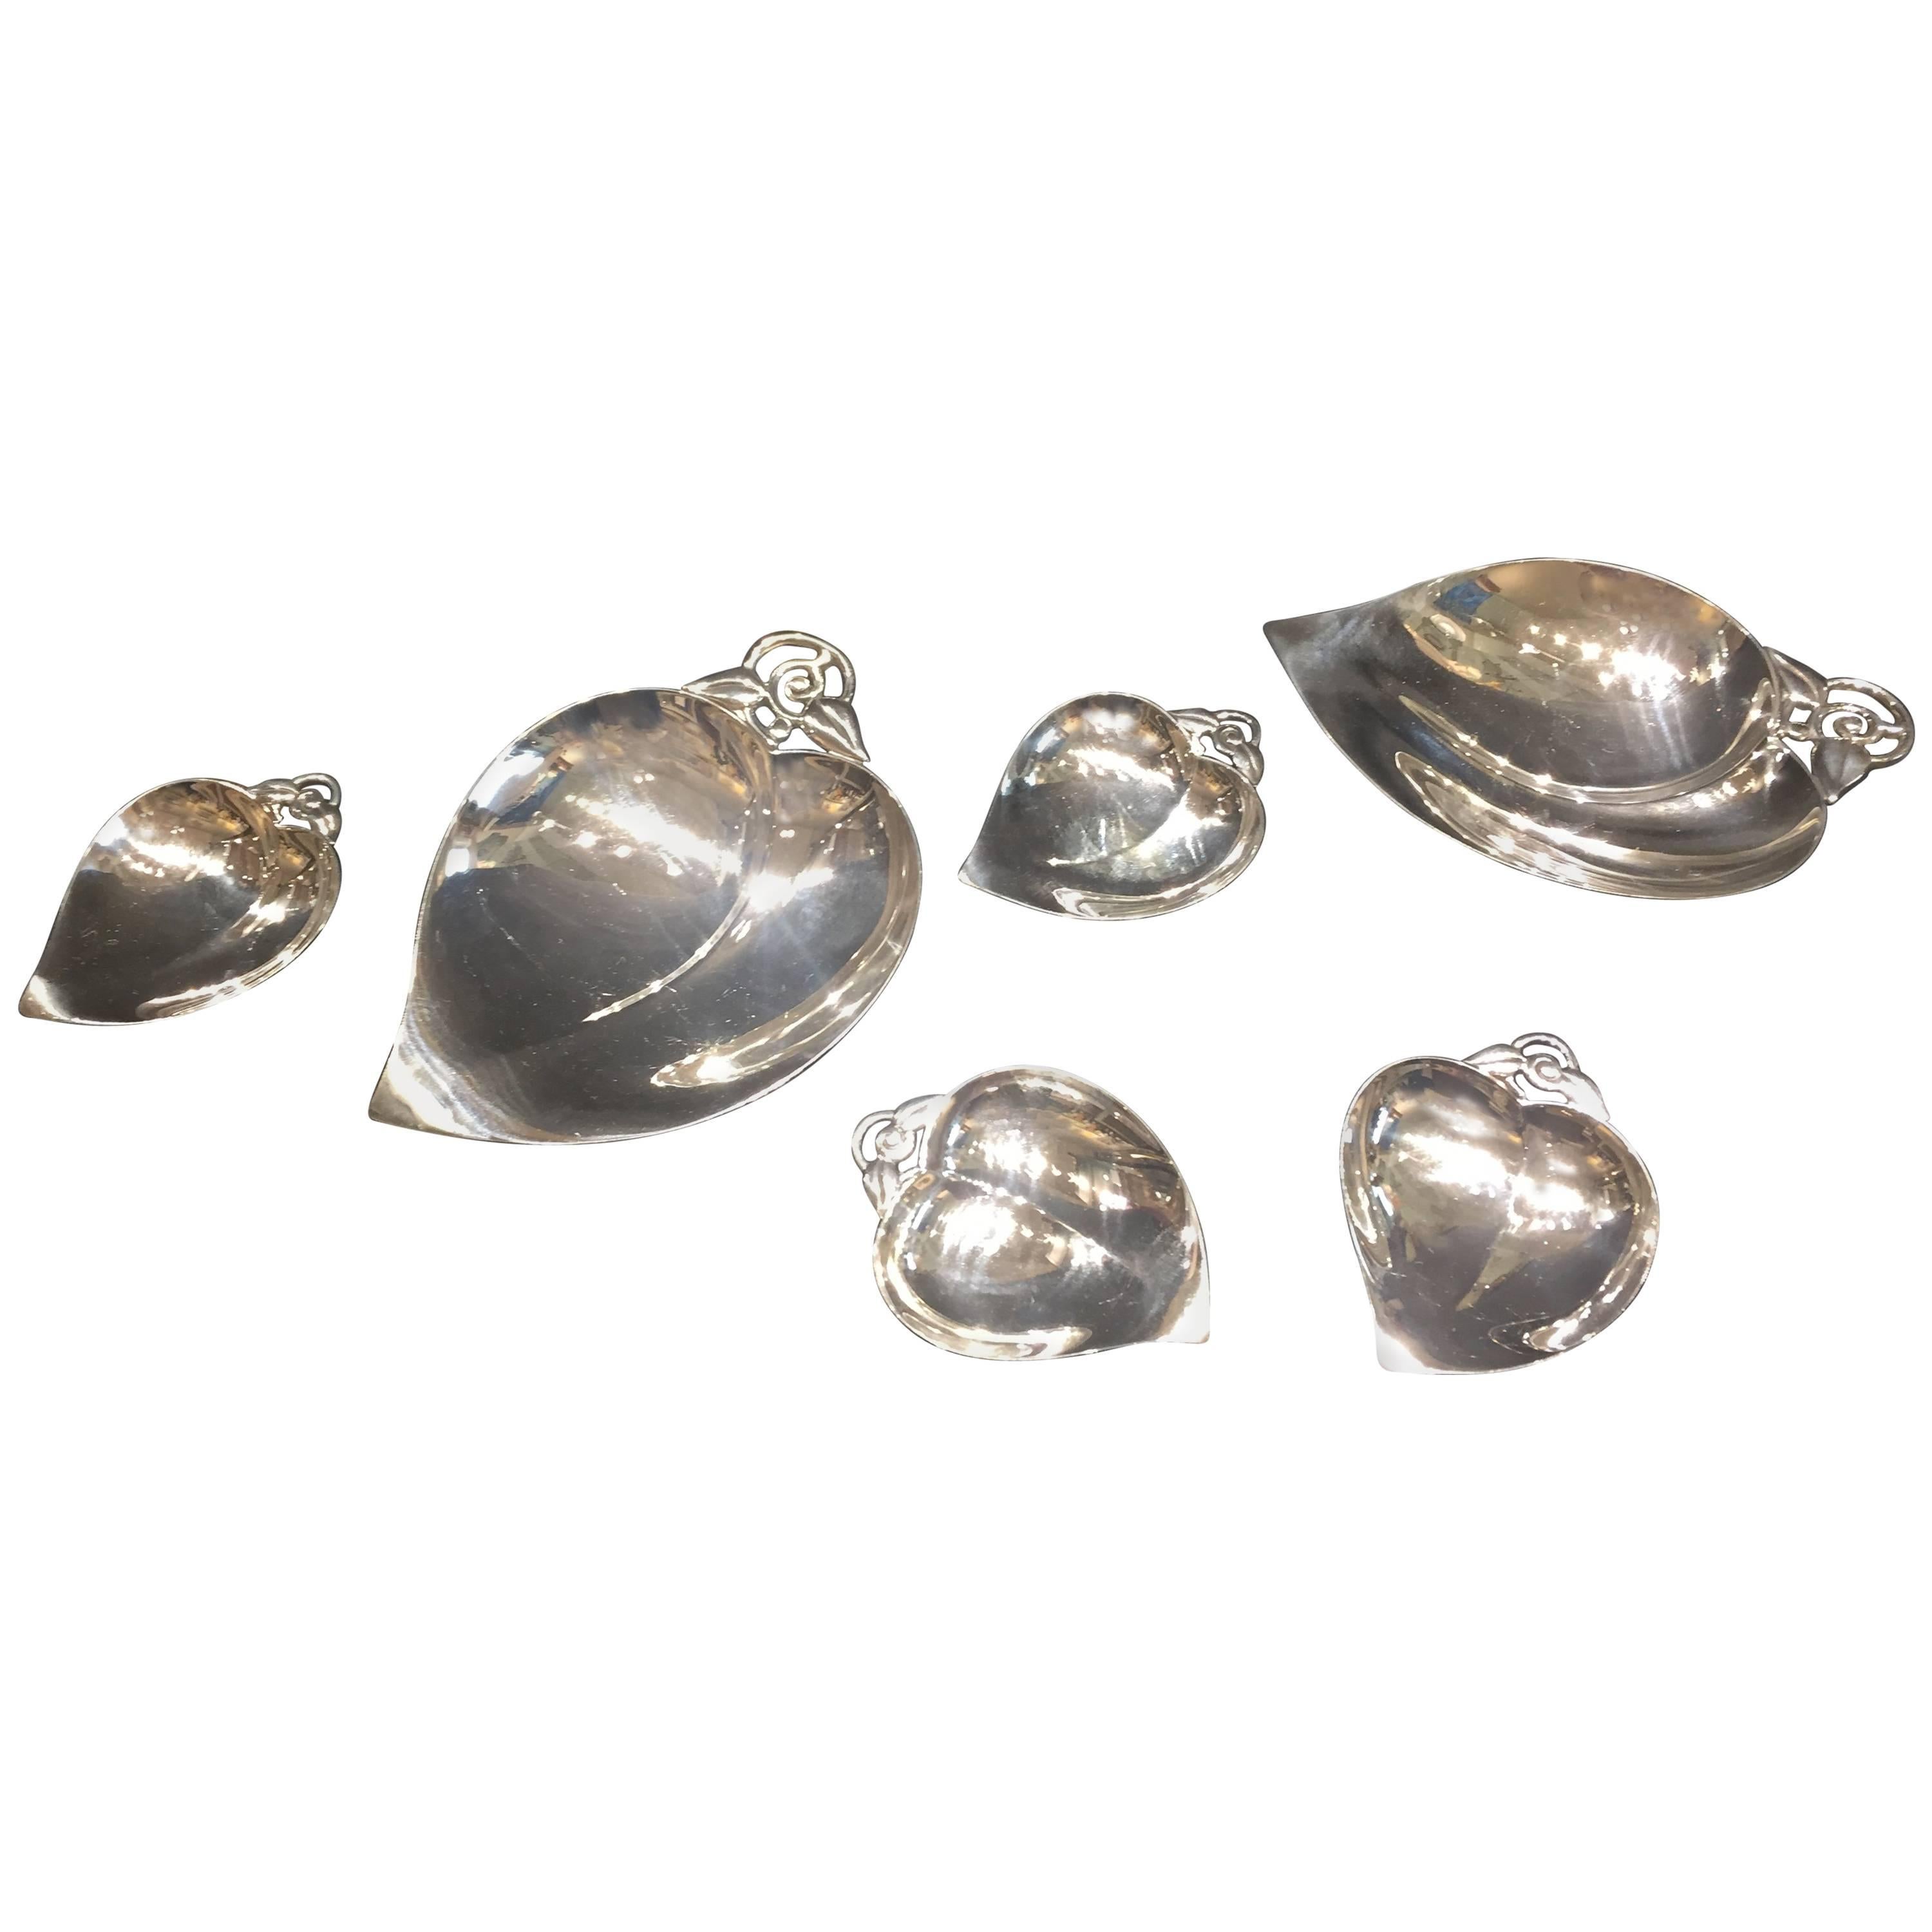 Tiffany & Co., Mid-Century Modern Sterling Silver Candy and Nut Set, circa 1950s